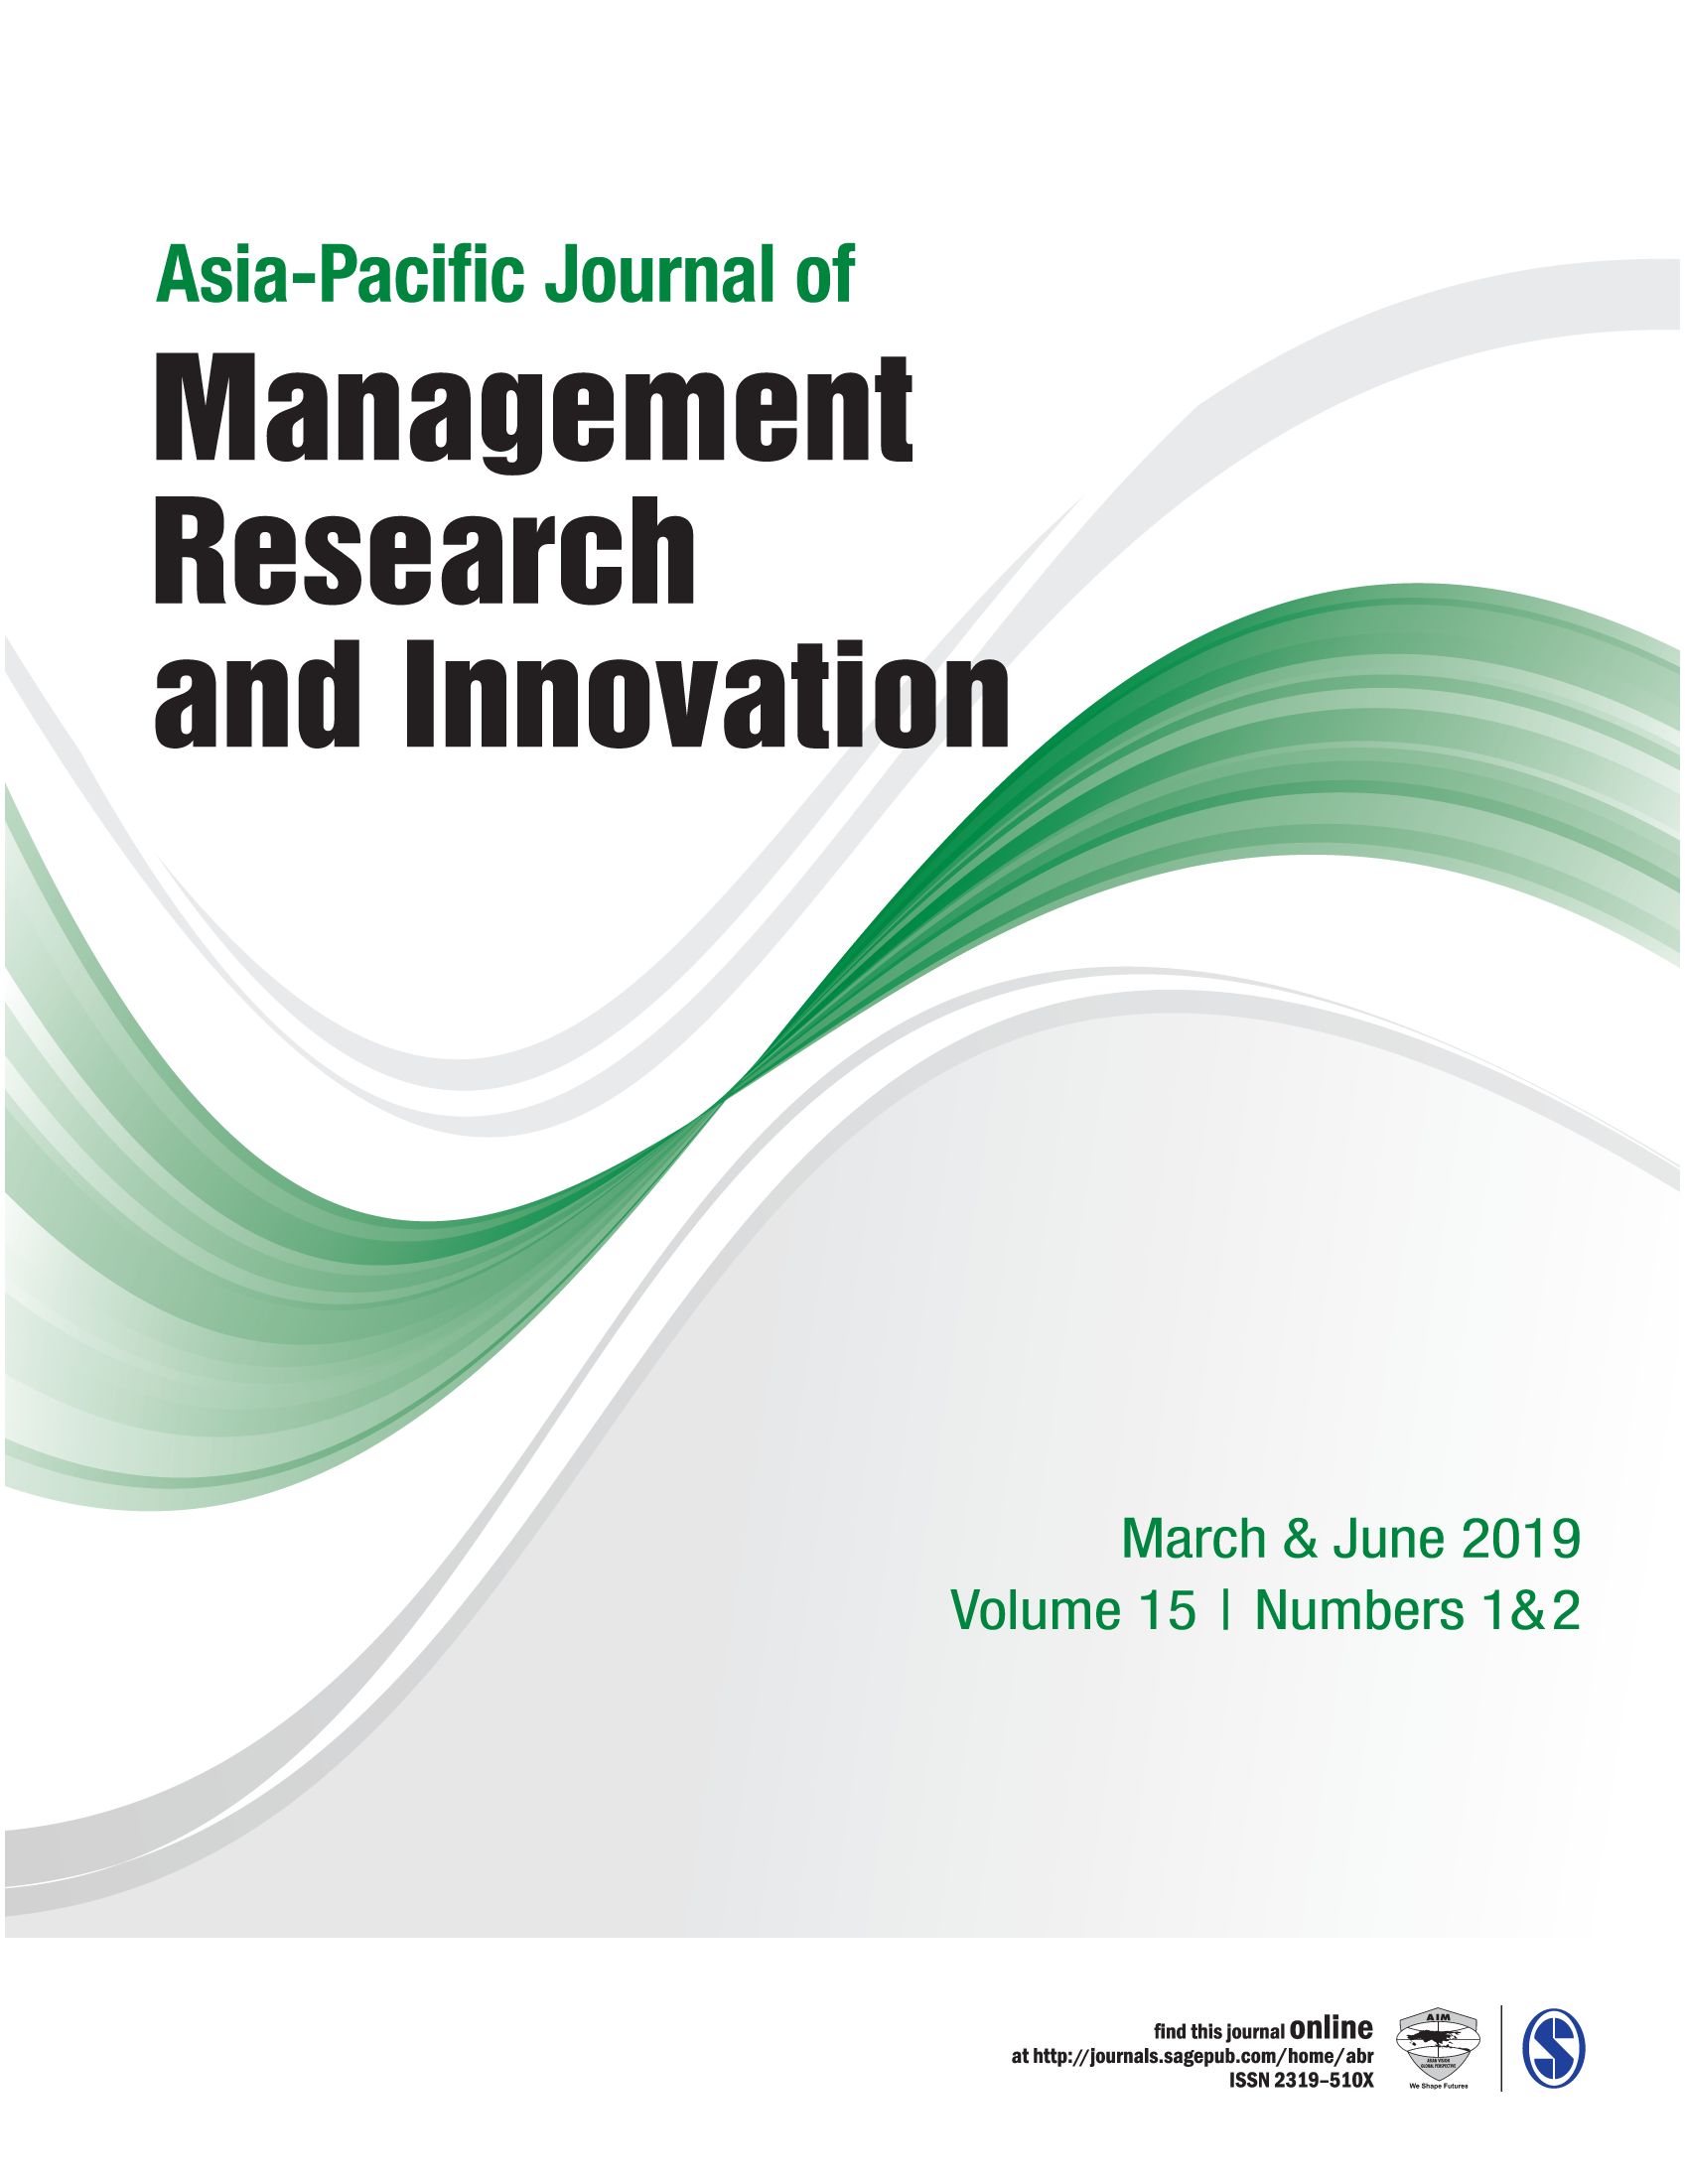 Asia Pacific Journal of Management Research and Innovation